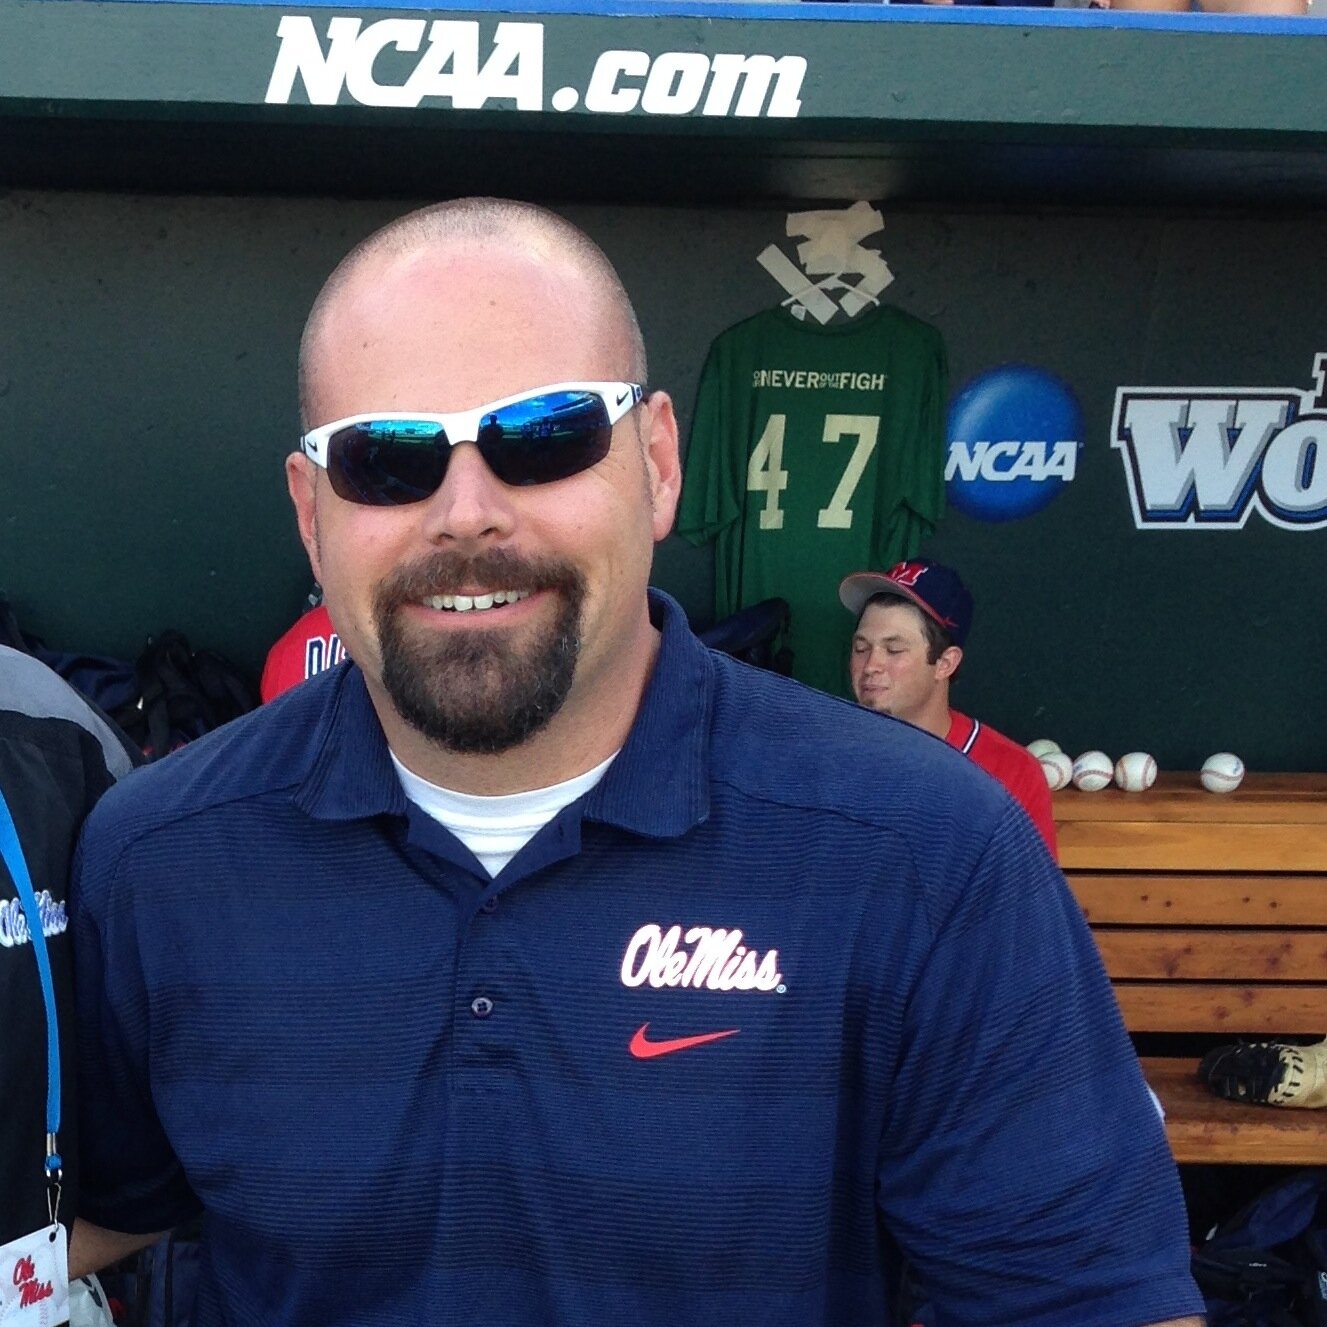 Husband to an amazing wife, father of 2 beautiful girls, follower of Christ, Athletic Trainer for Ole Miss Baseball